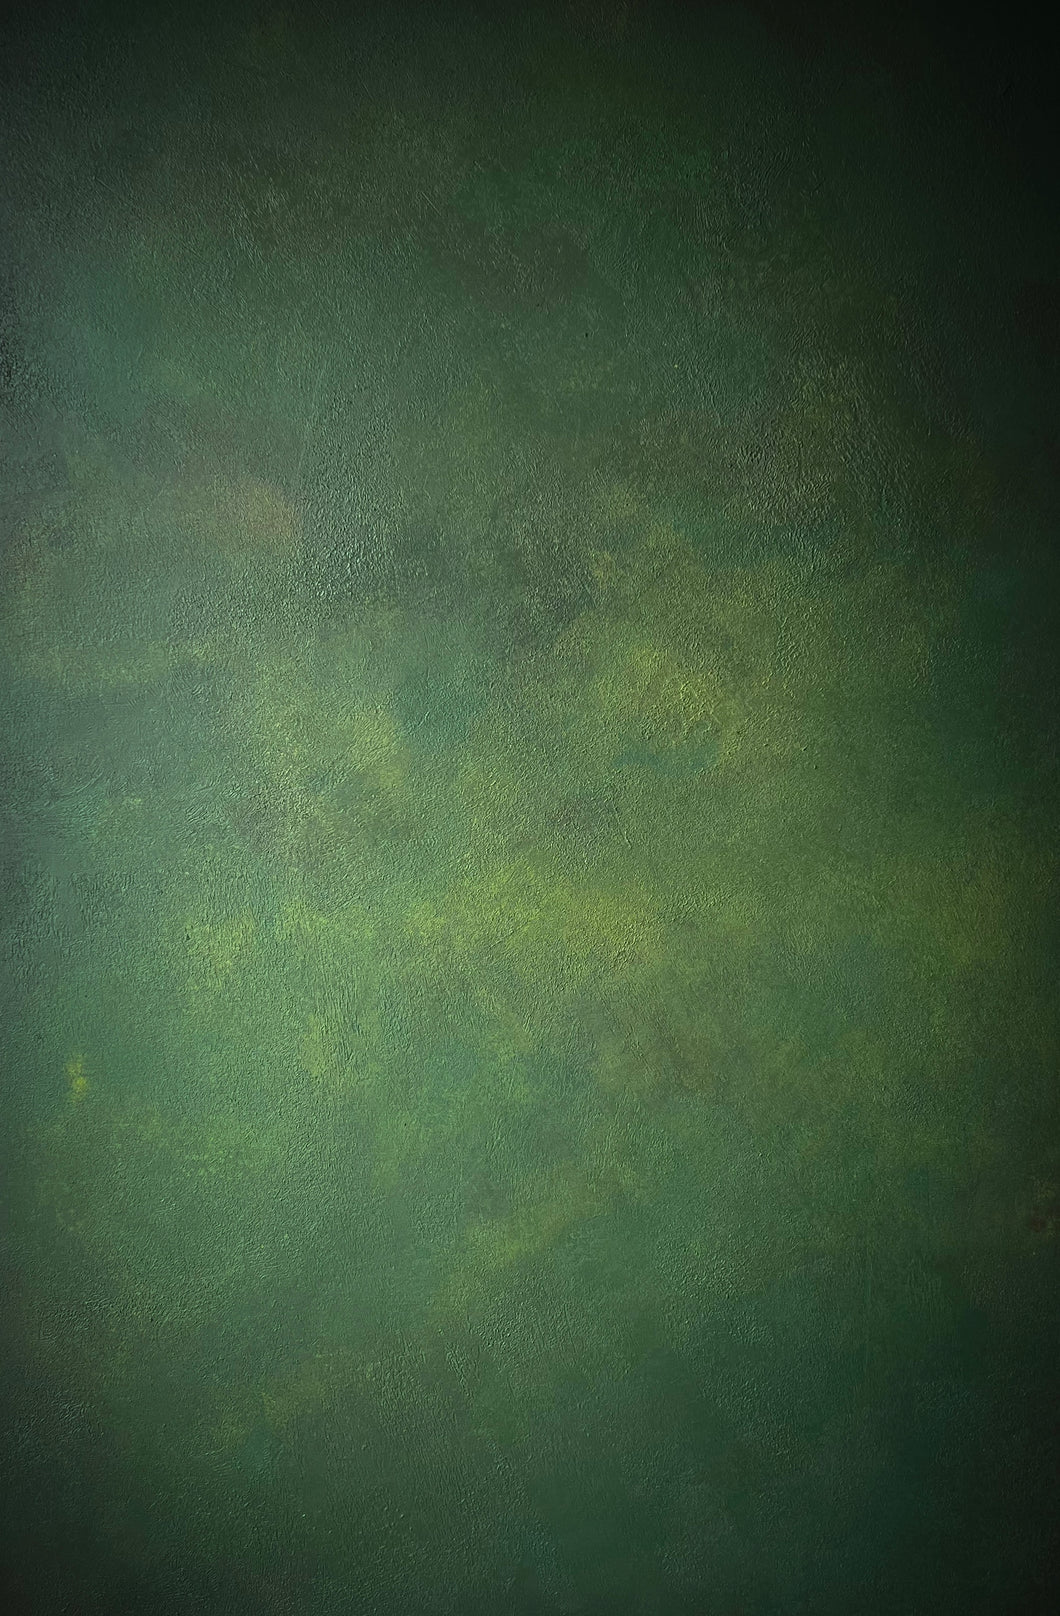 ‘Dublin’ Hand-painted photography background, textured olive green plaster with umber & brighter pear green highlights